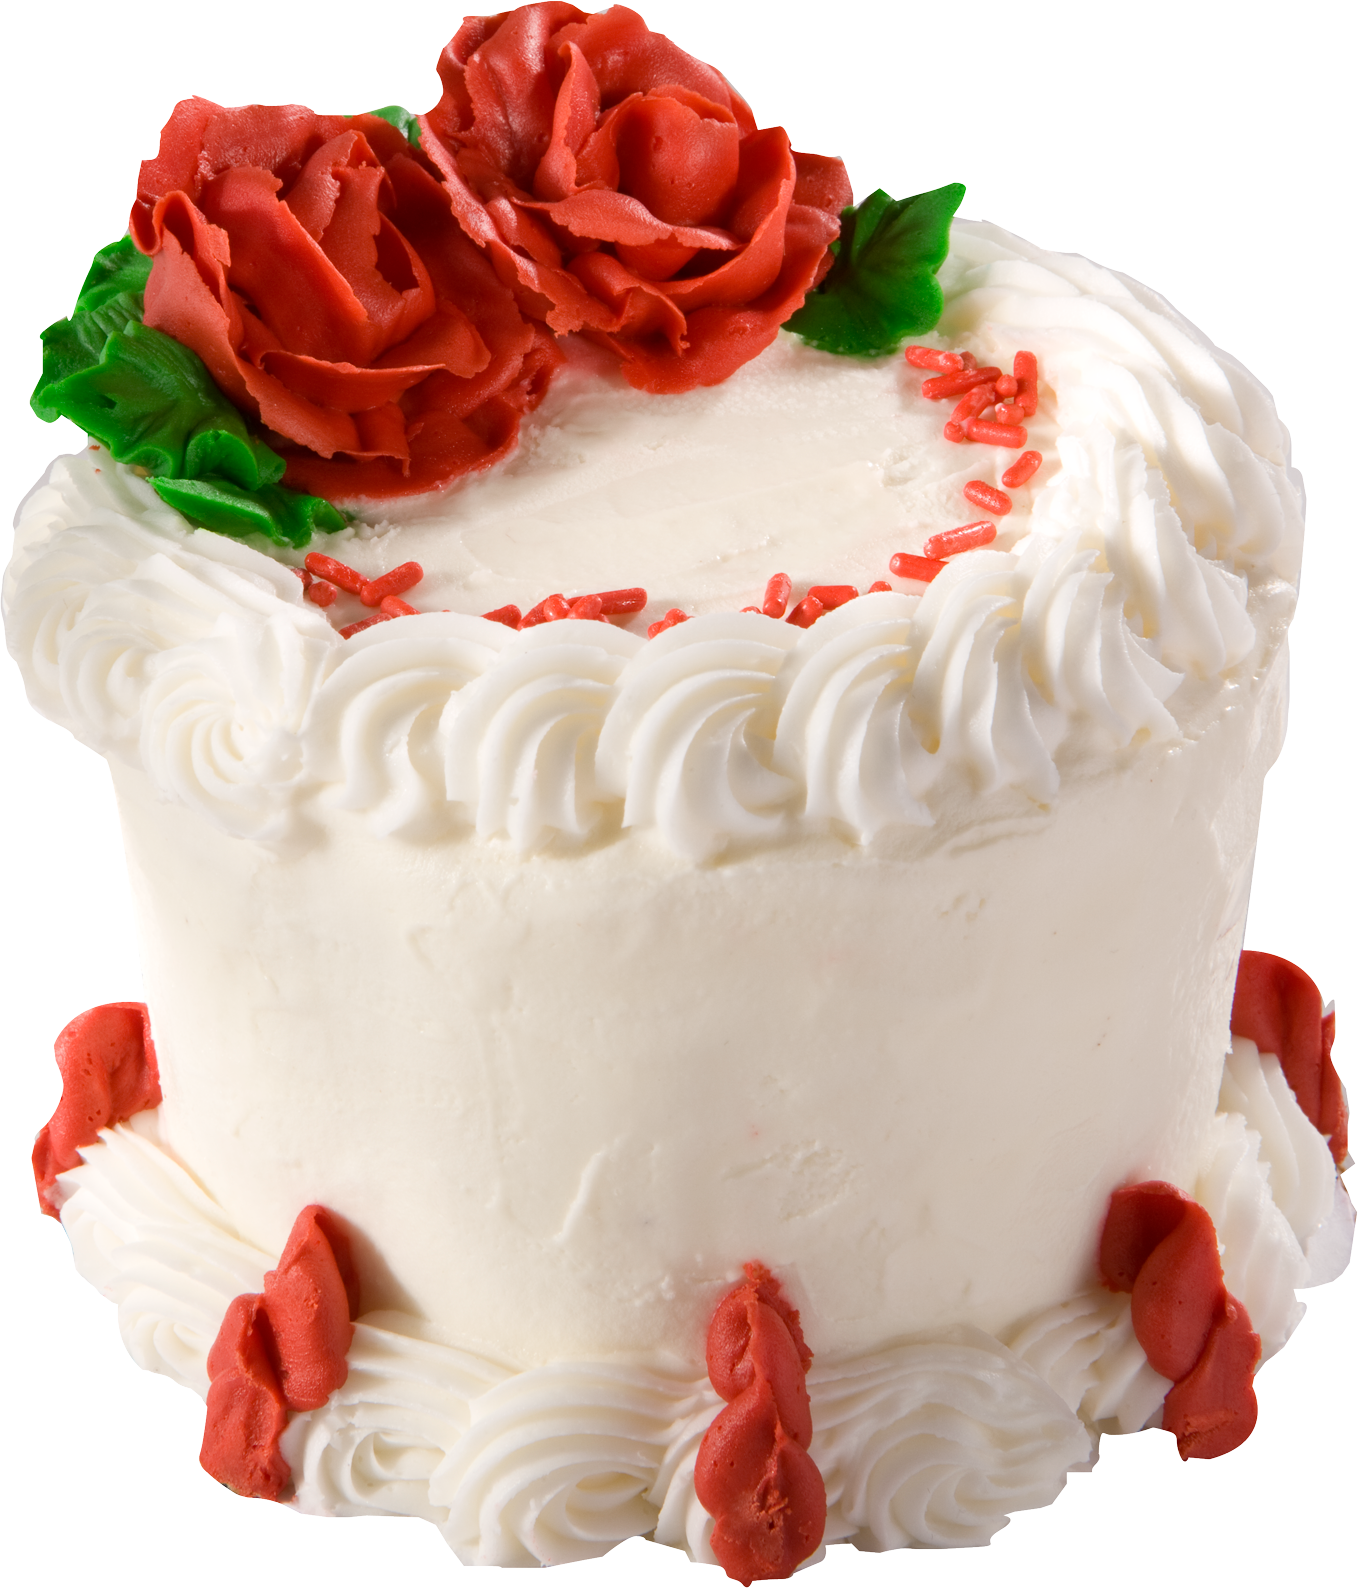 Birthday Cake PNG Hd Transparent Image And Clipart Image For Free Download  - Lovepik | 401230374